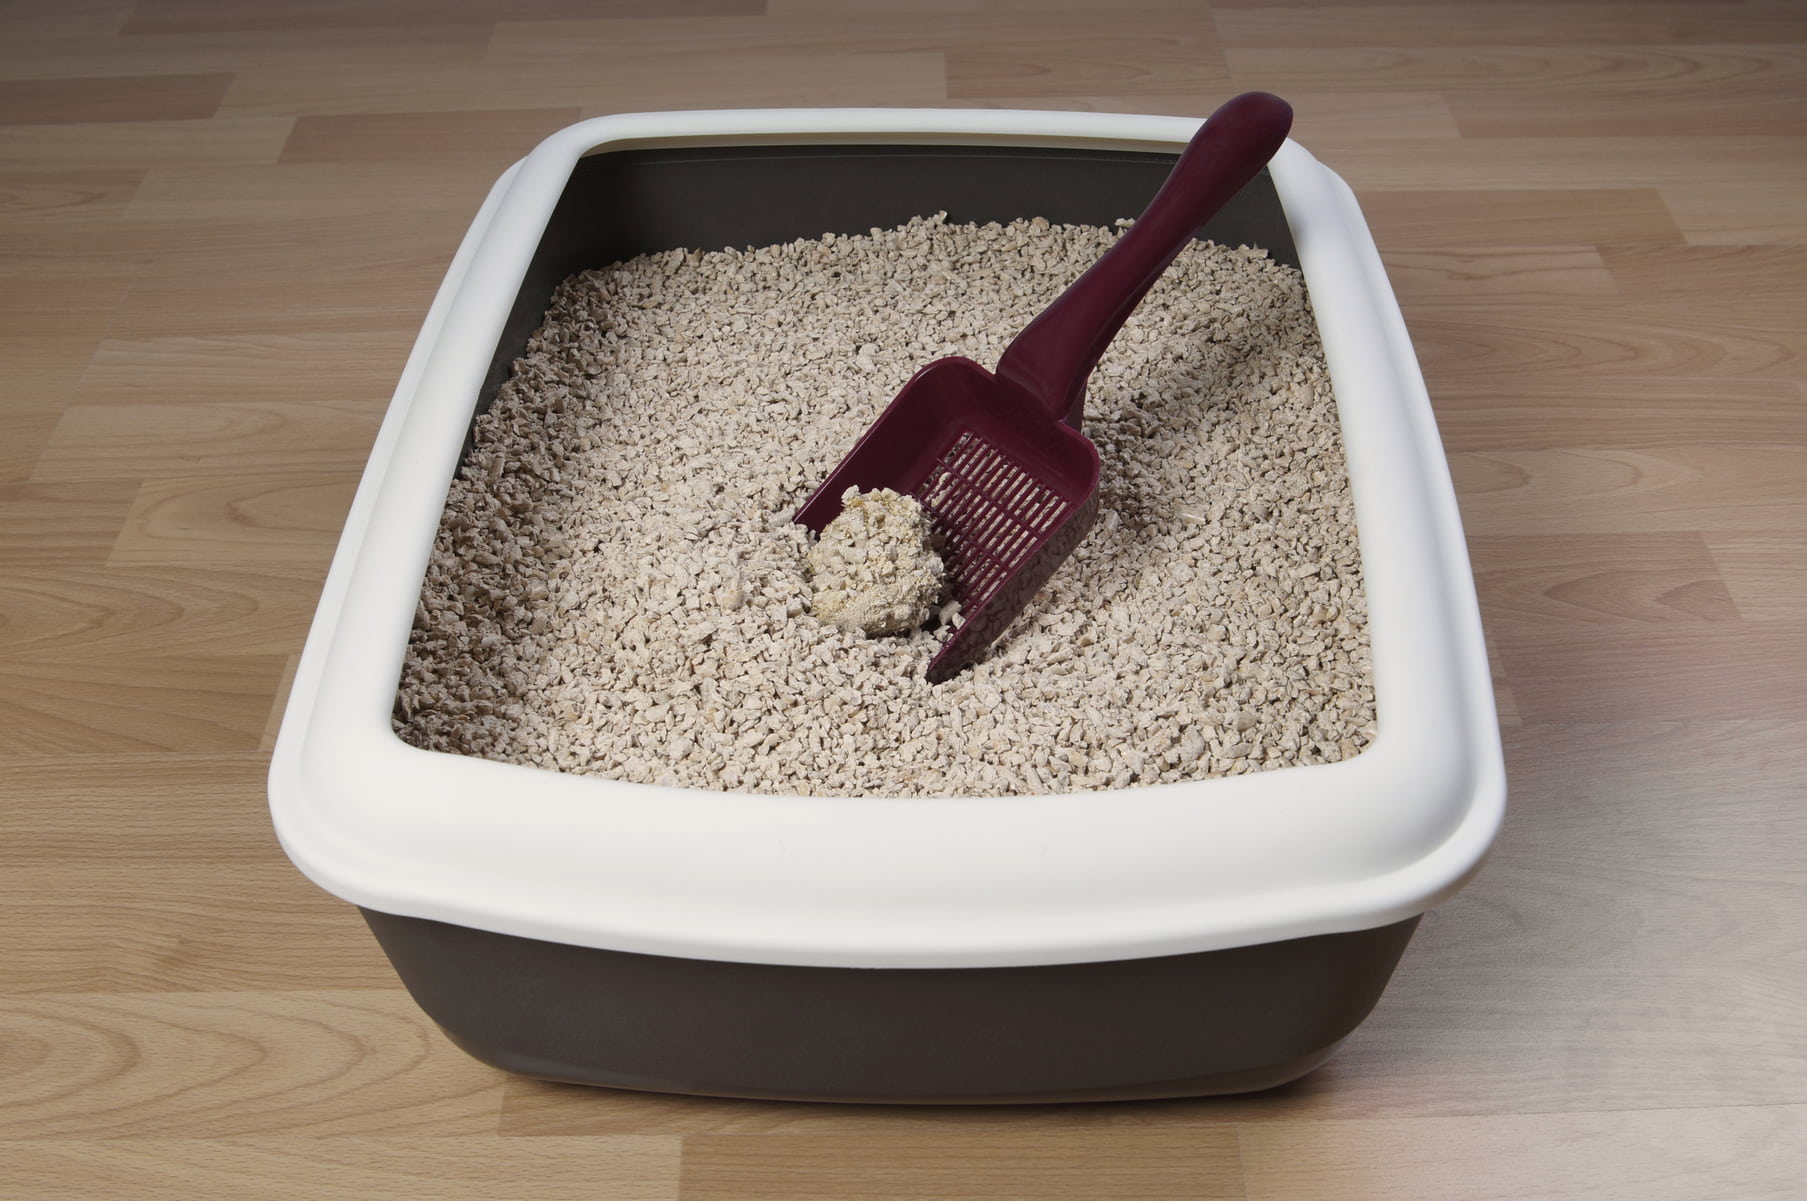 Top 5 Cat Litter Boxes - Purrfect Love